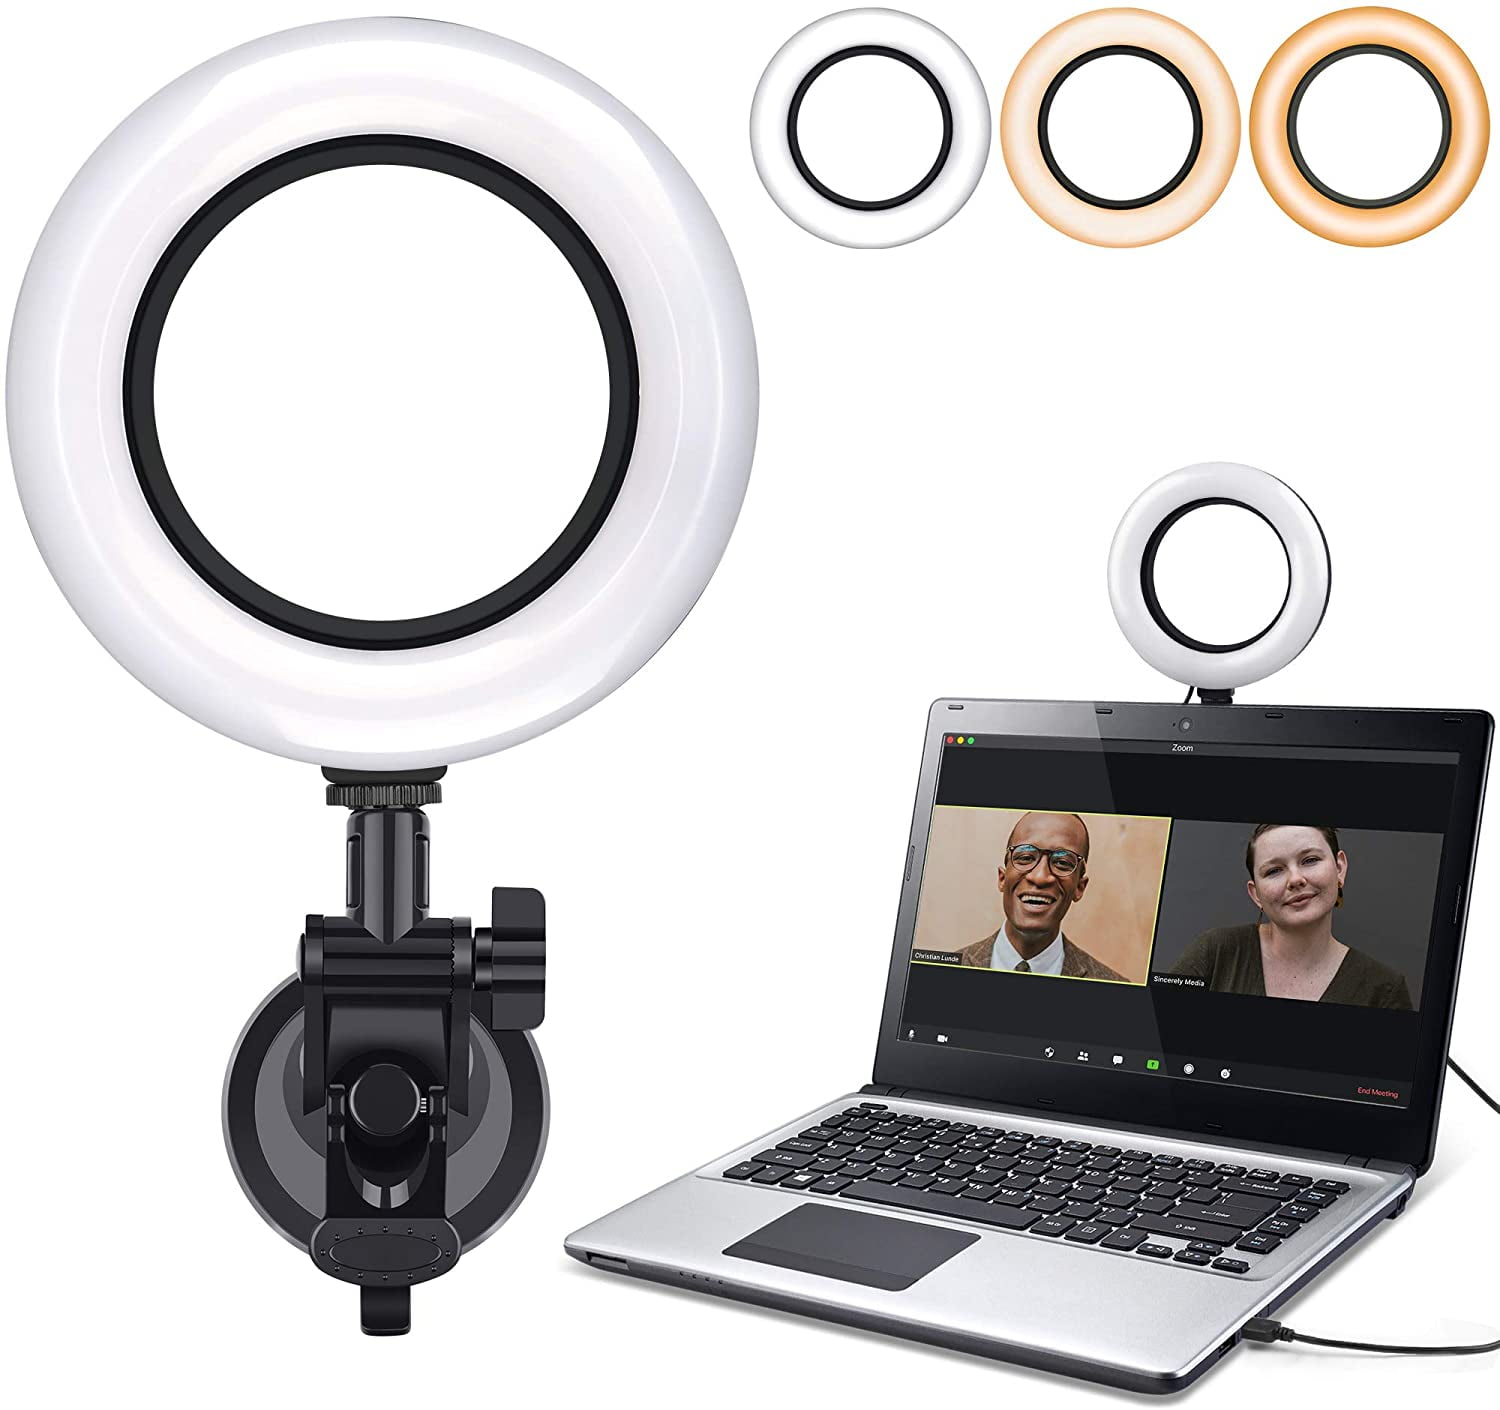 VWMYQ Video Conference Lighting with Remote,Zoom Lighting for Computer,10 Light Modes and 7 Brightness Level,Webcam Light for Zoom Call Lighting TikTok 10 Light Modes,Pink Shell Remote Working 